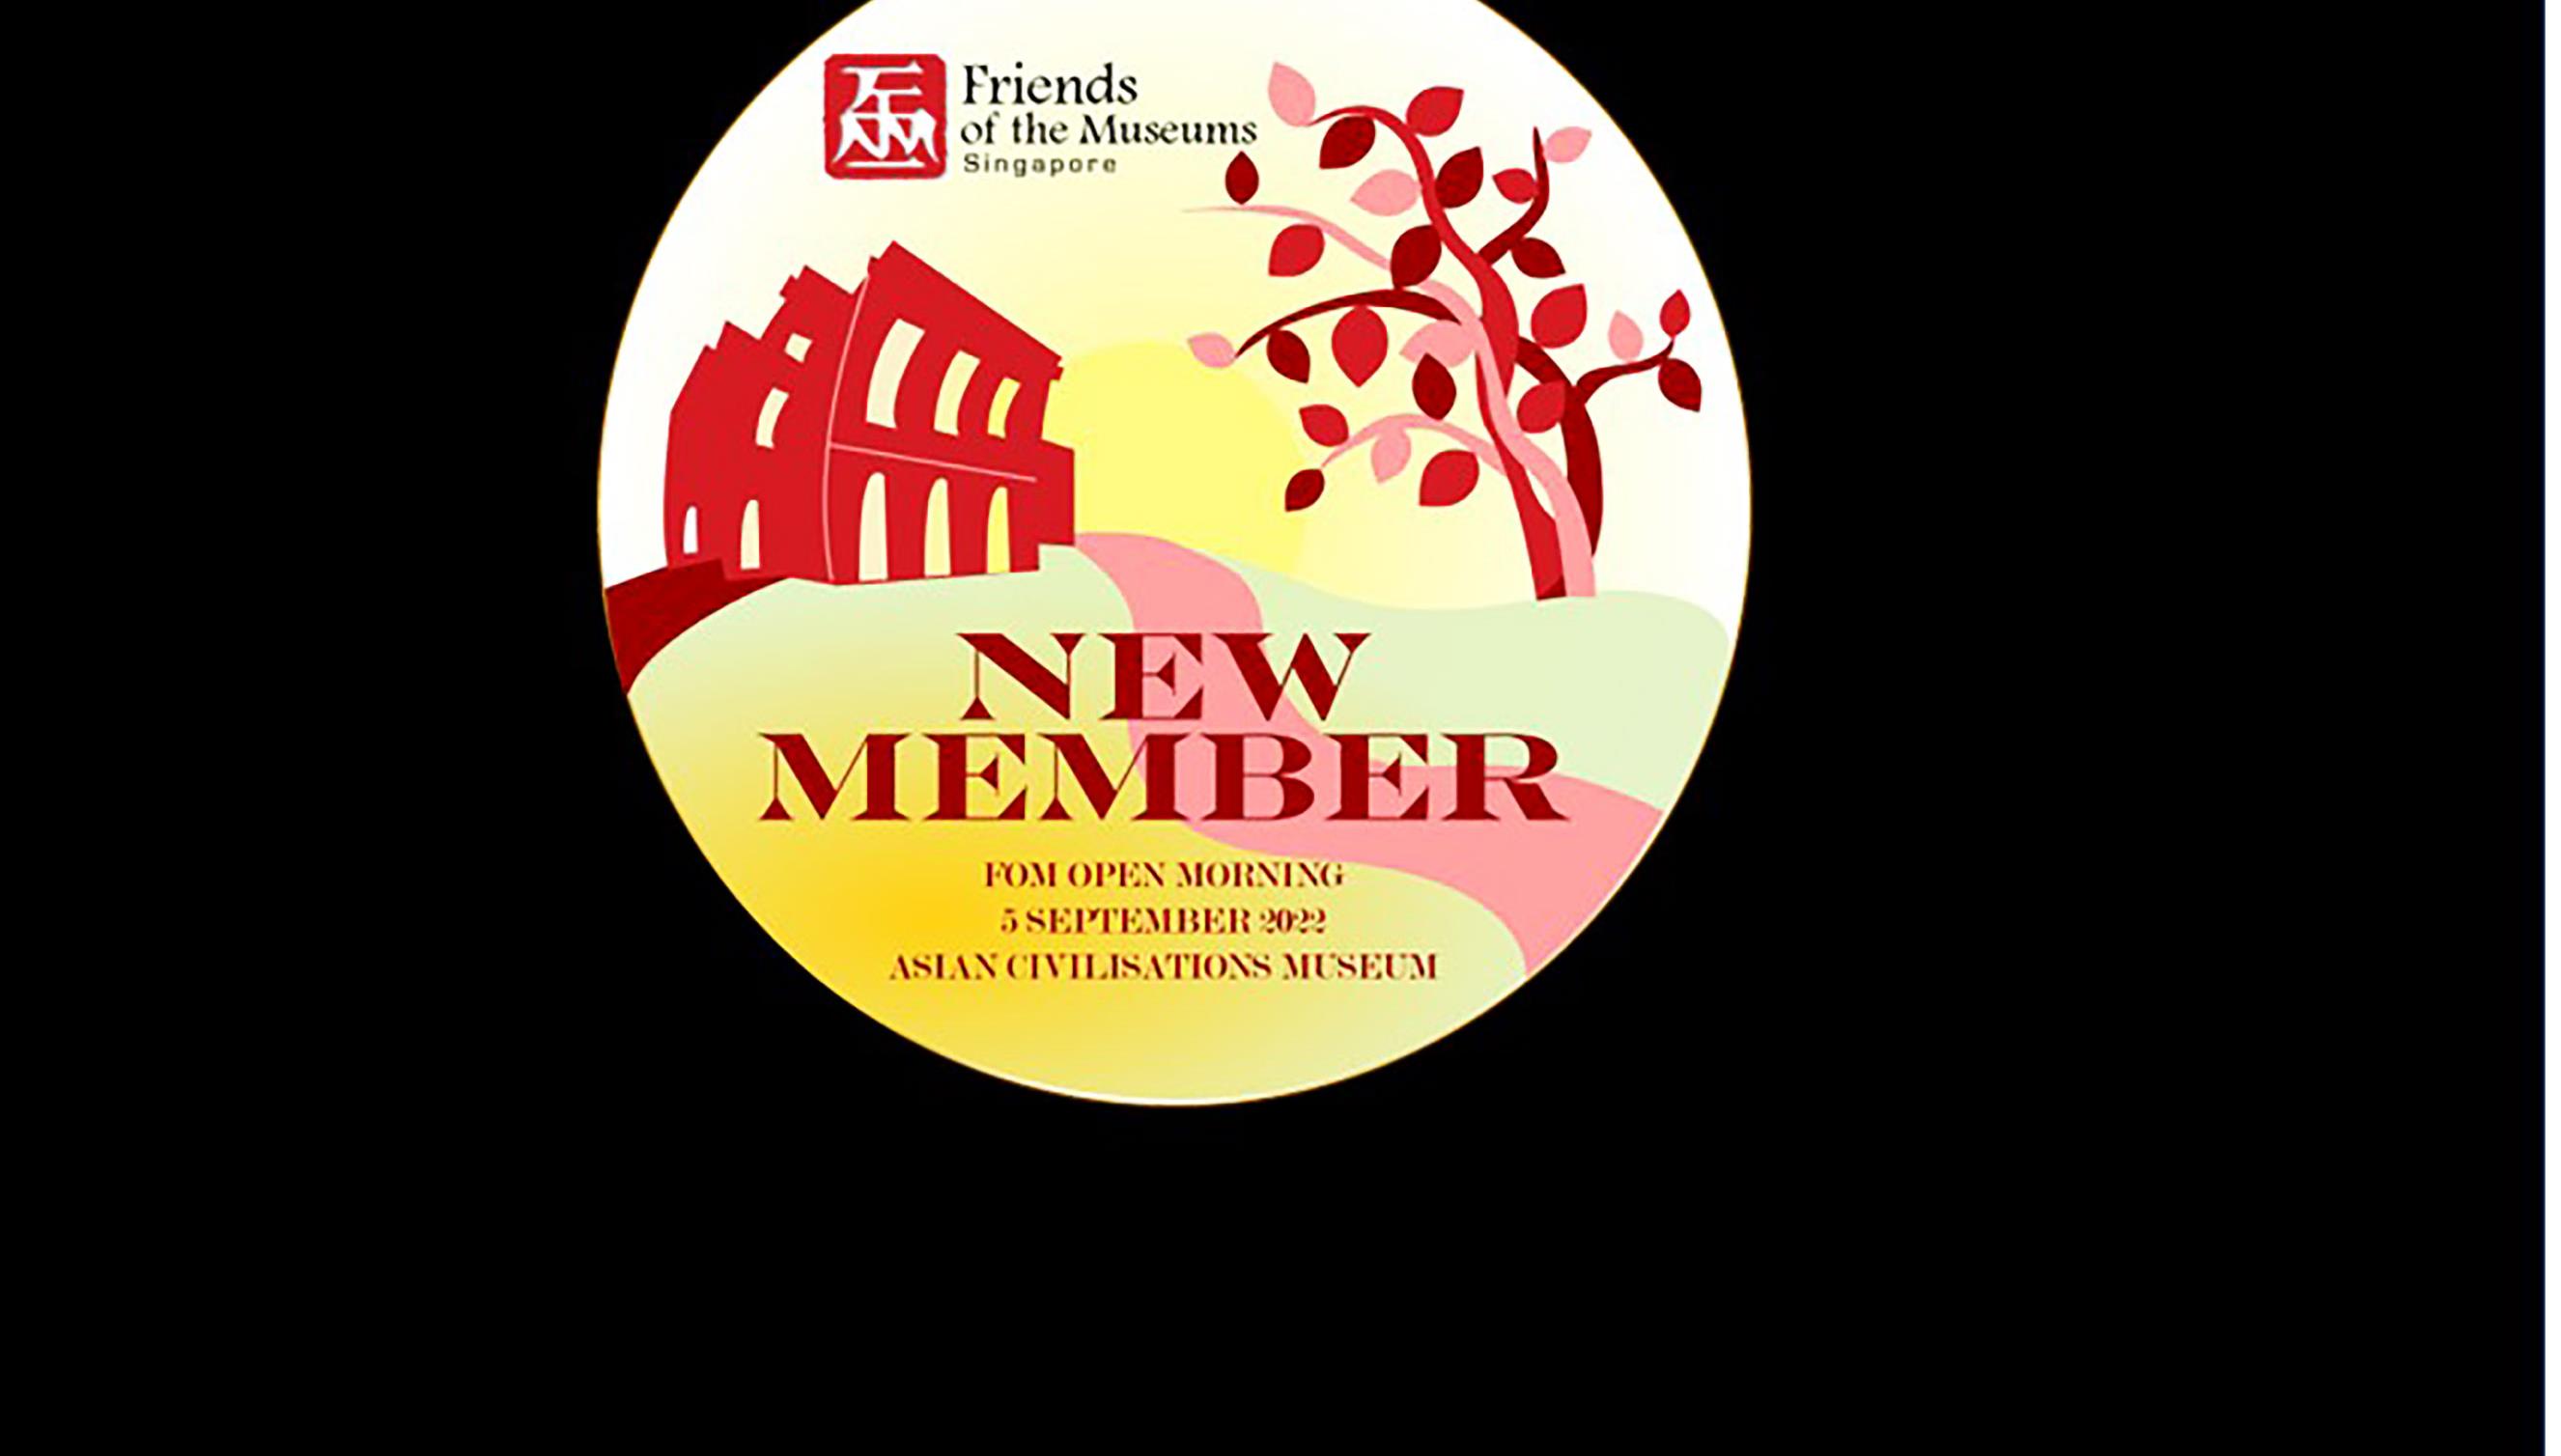 Become a new FOM Member @ the FOM Open Morning 5/9/22 & Receive a Welcome Gift!